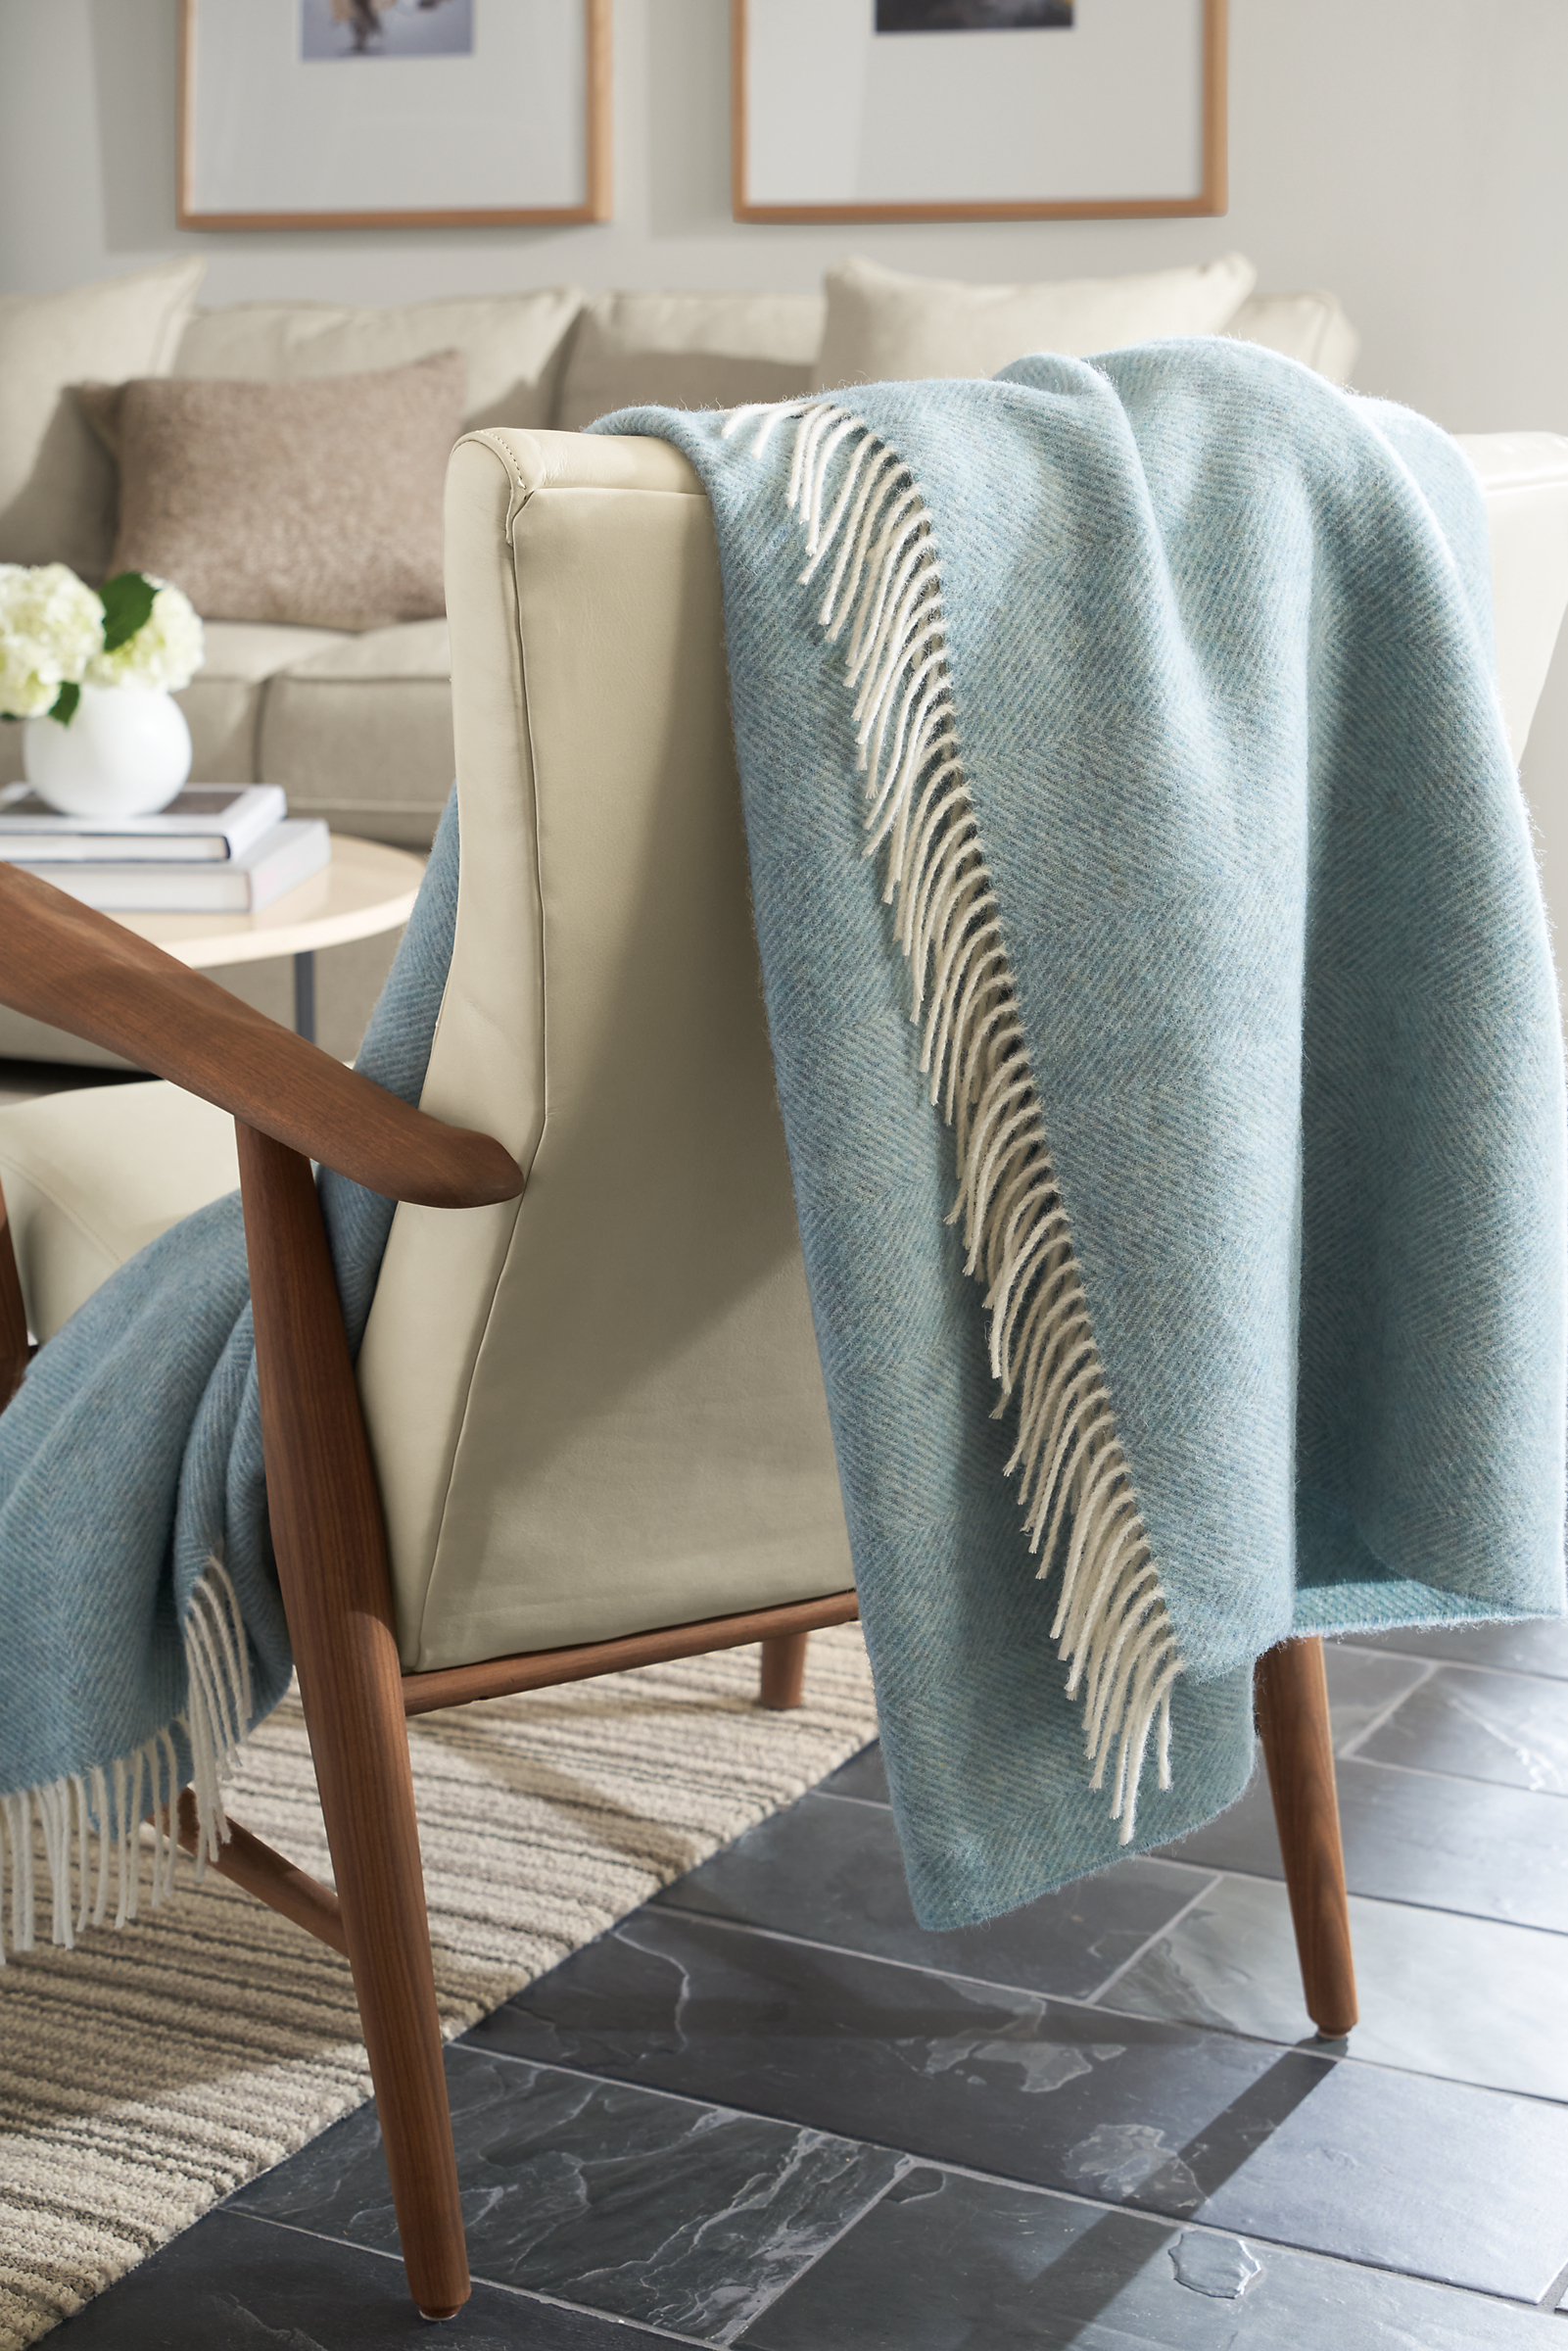 Living room setting with Claridge Throw Blanket in Sky draped over a Jonas lounge chair.